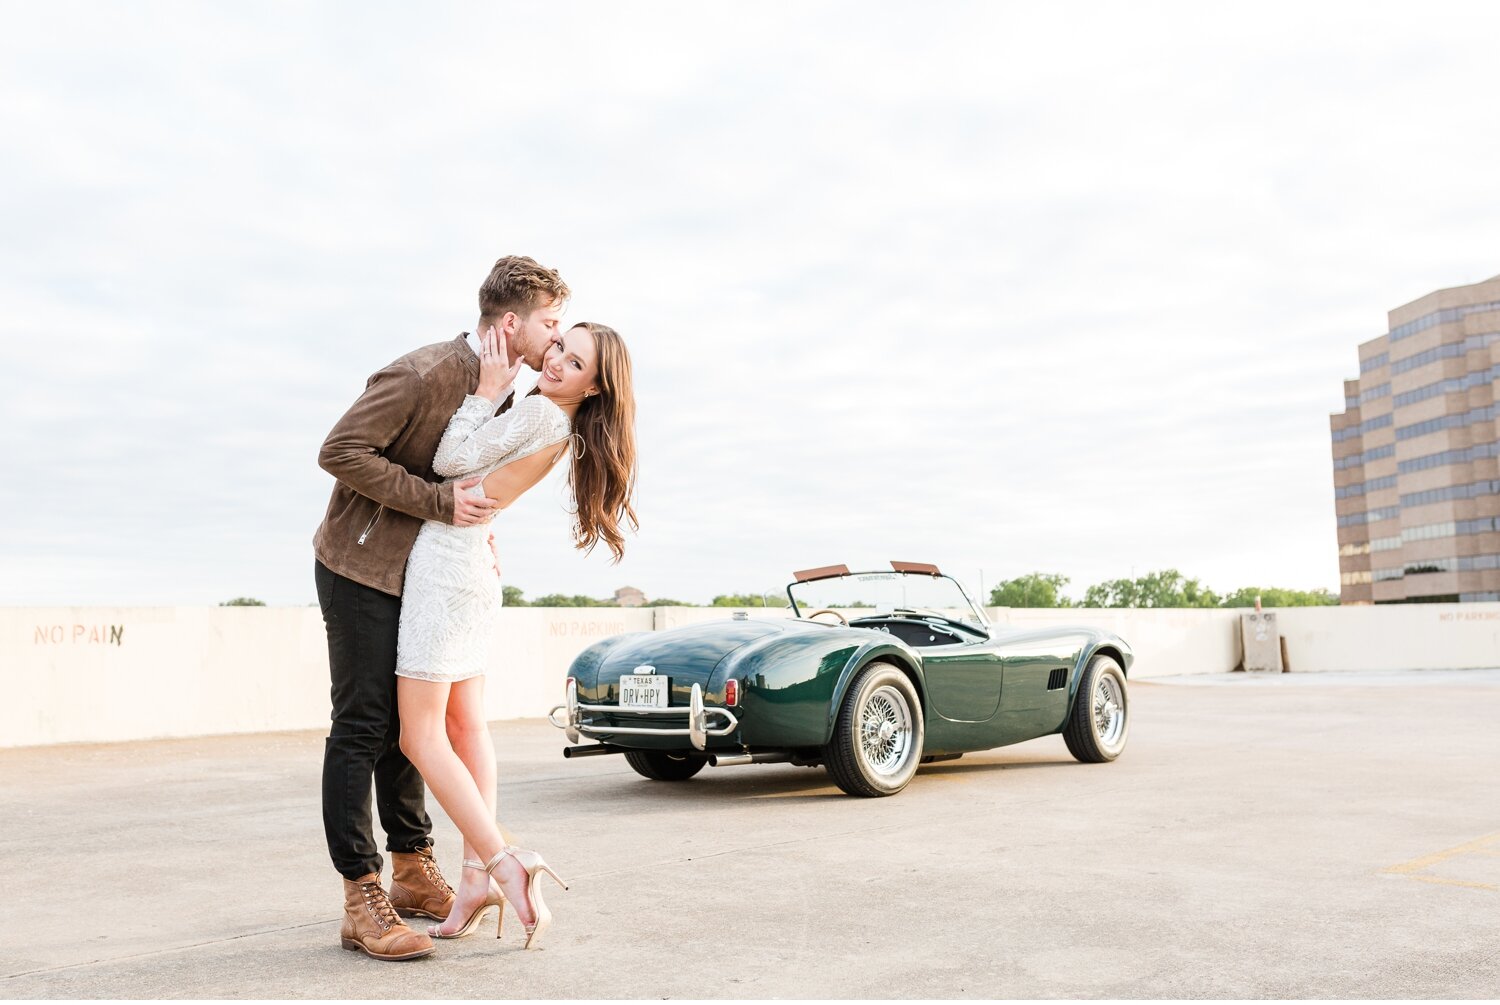 London + Christian Downtown Austin Rooftop Classic Car Engagement Session_0021.jpg